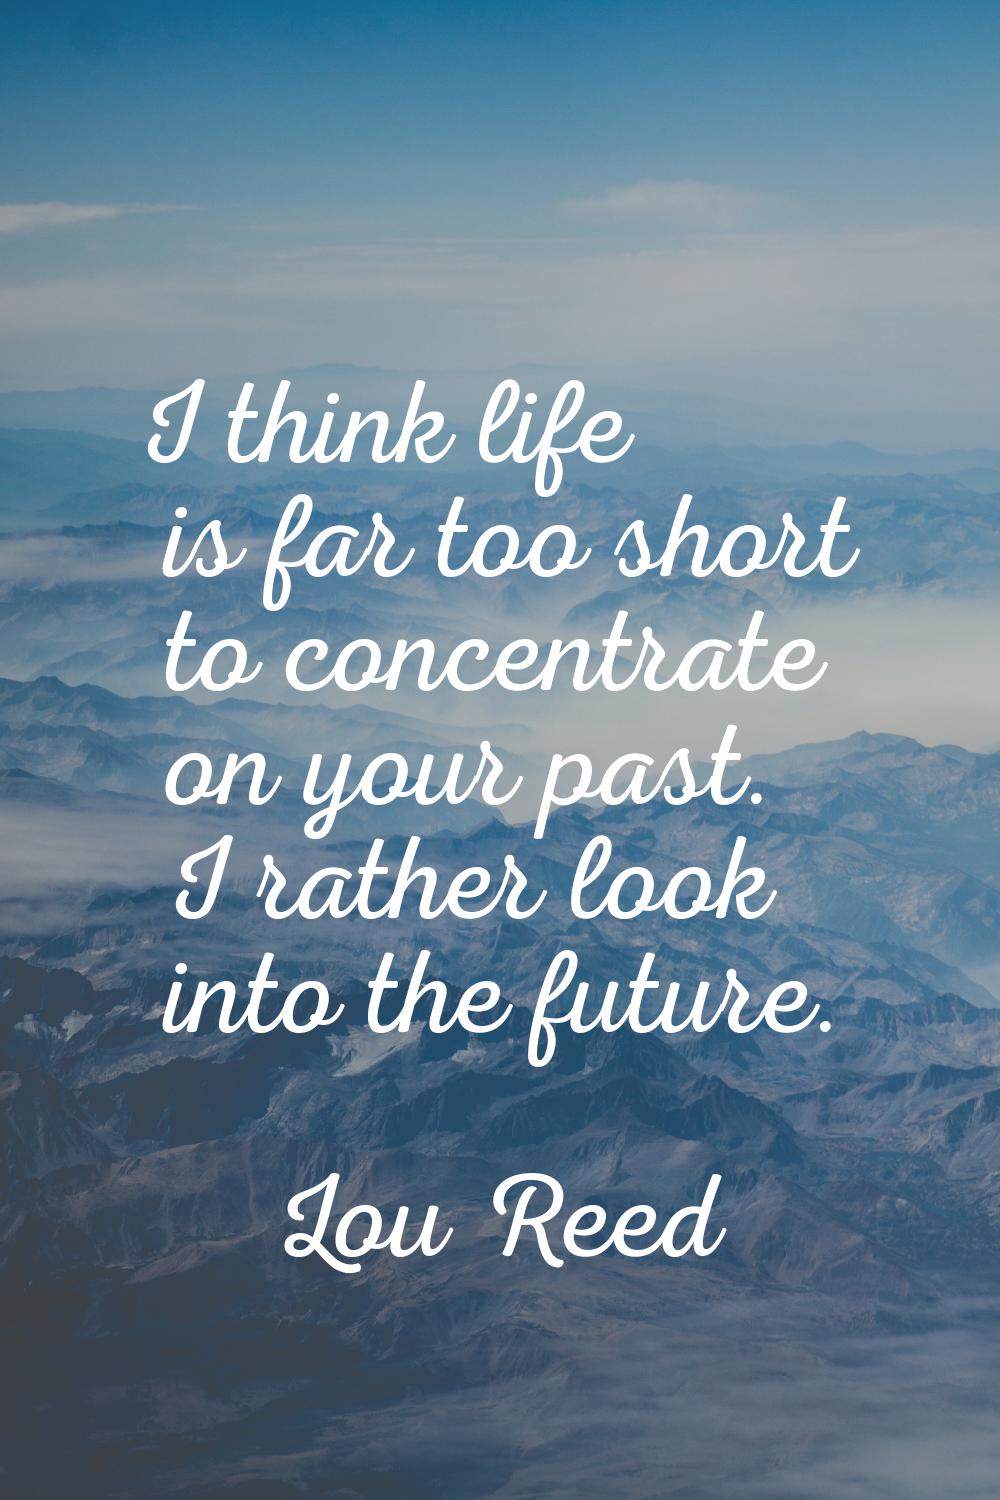 I think life is far too short to concentrate on your past. I rather look into the future.